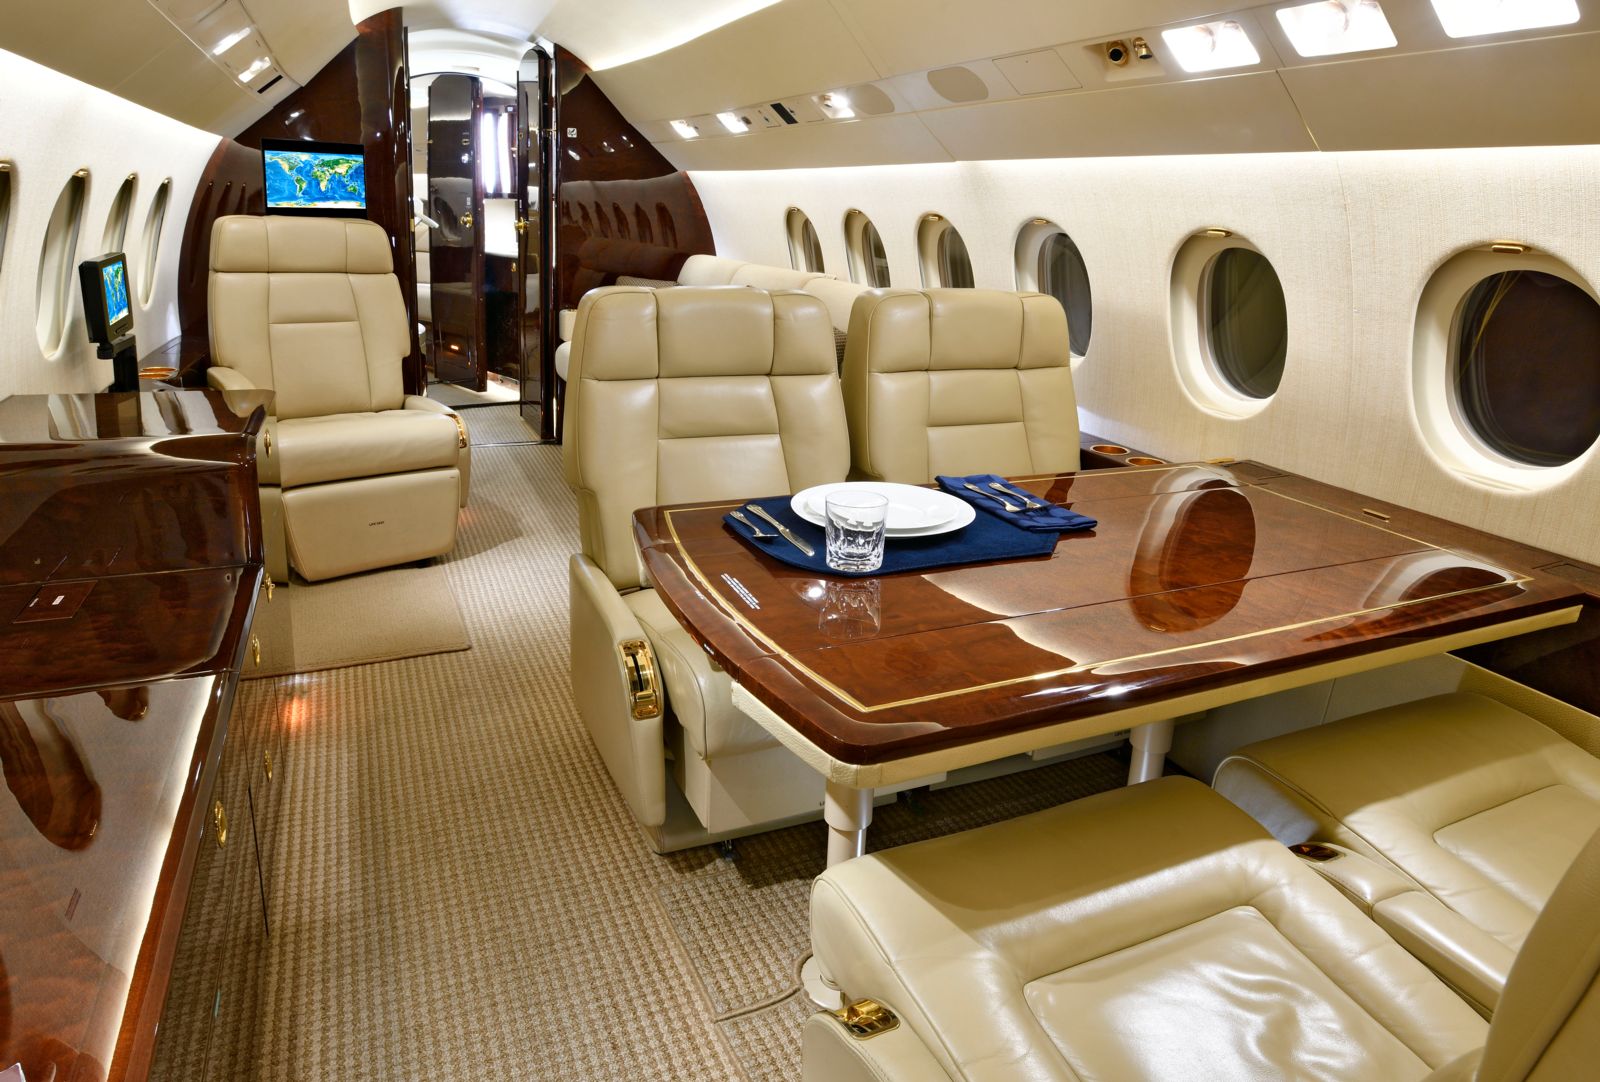 Dassault Falcon 900EX EASy  S/N 229 for sale | gallery image: /userfiles/images/F900EXy_sn229/mid%20aft.jpg